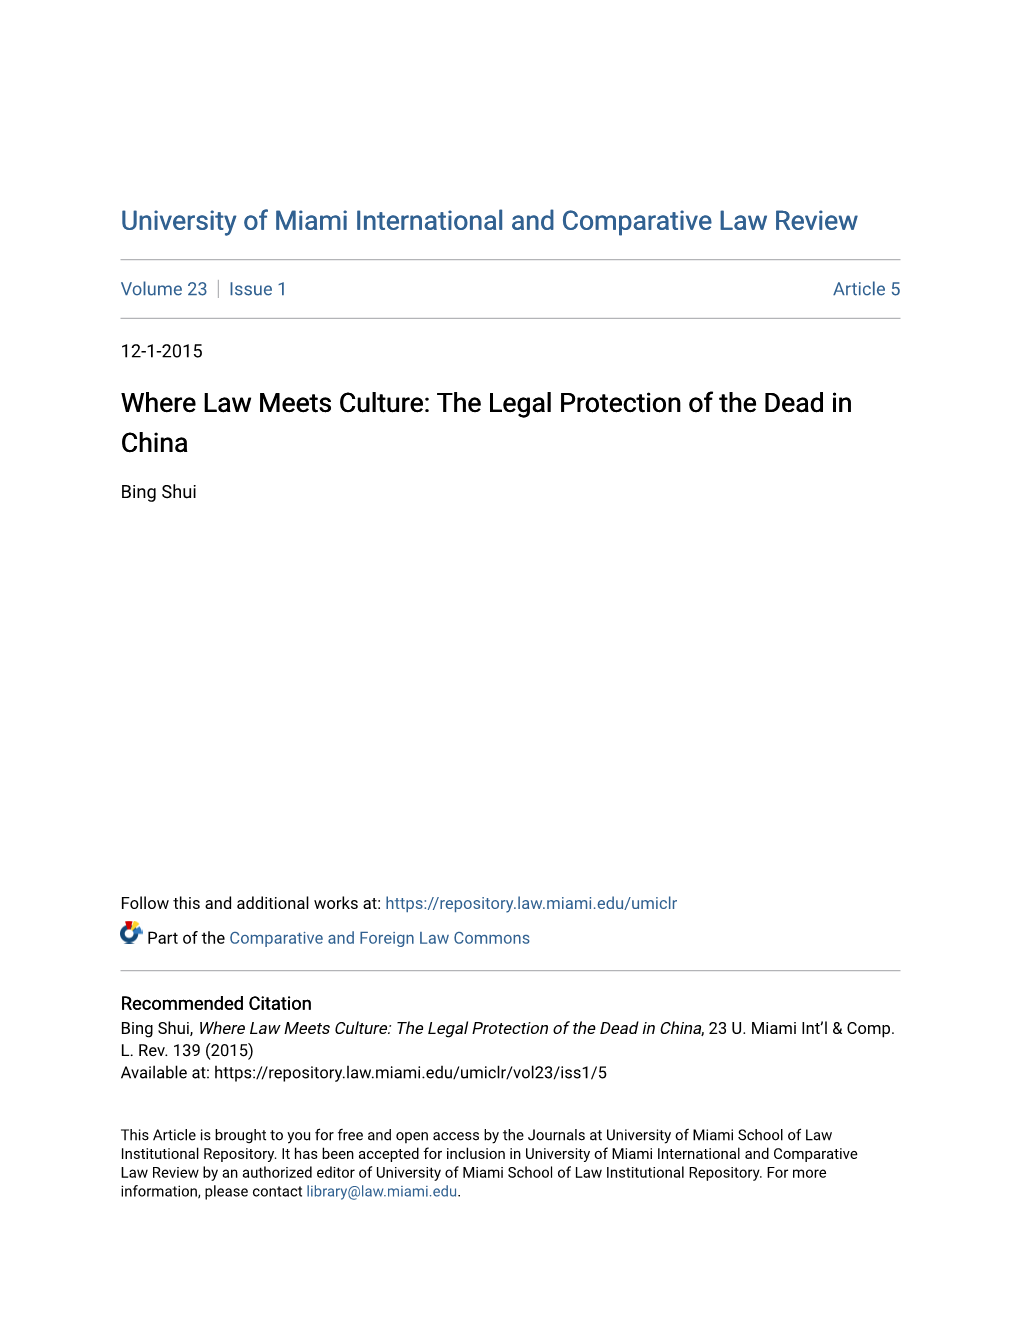 The Legal Protection of the Dead in China